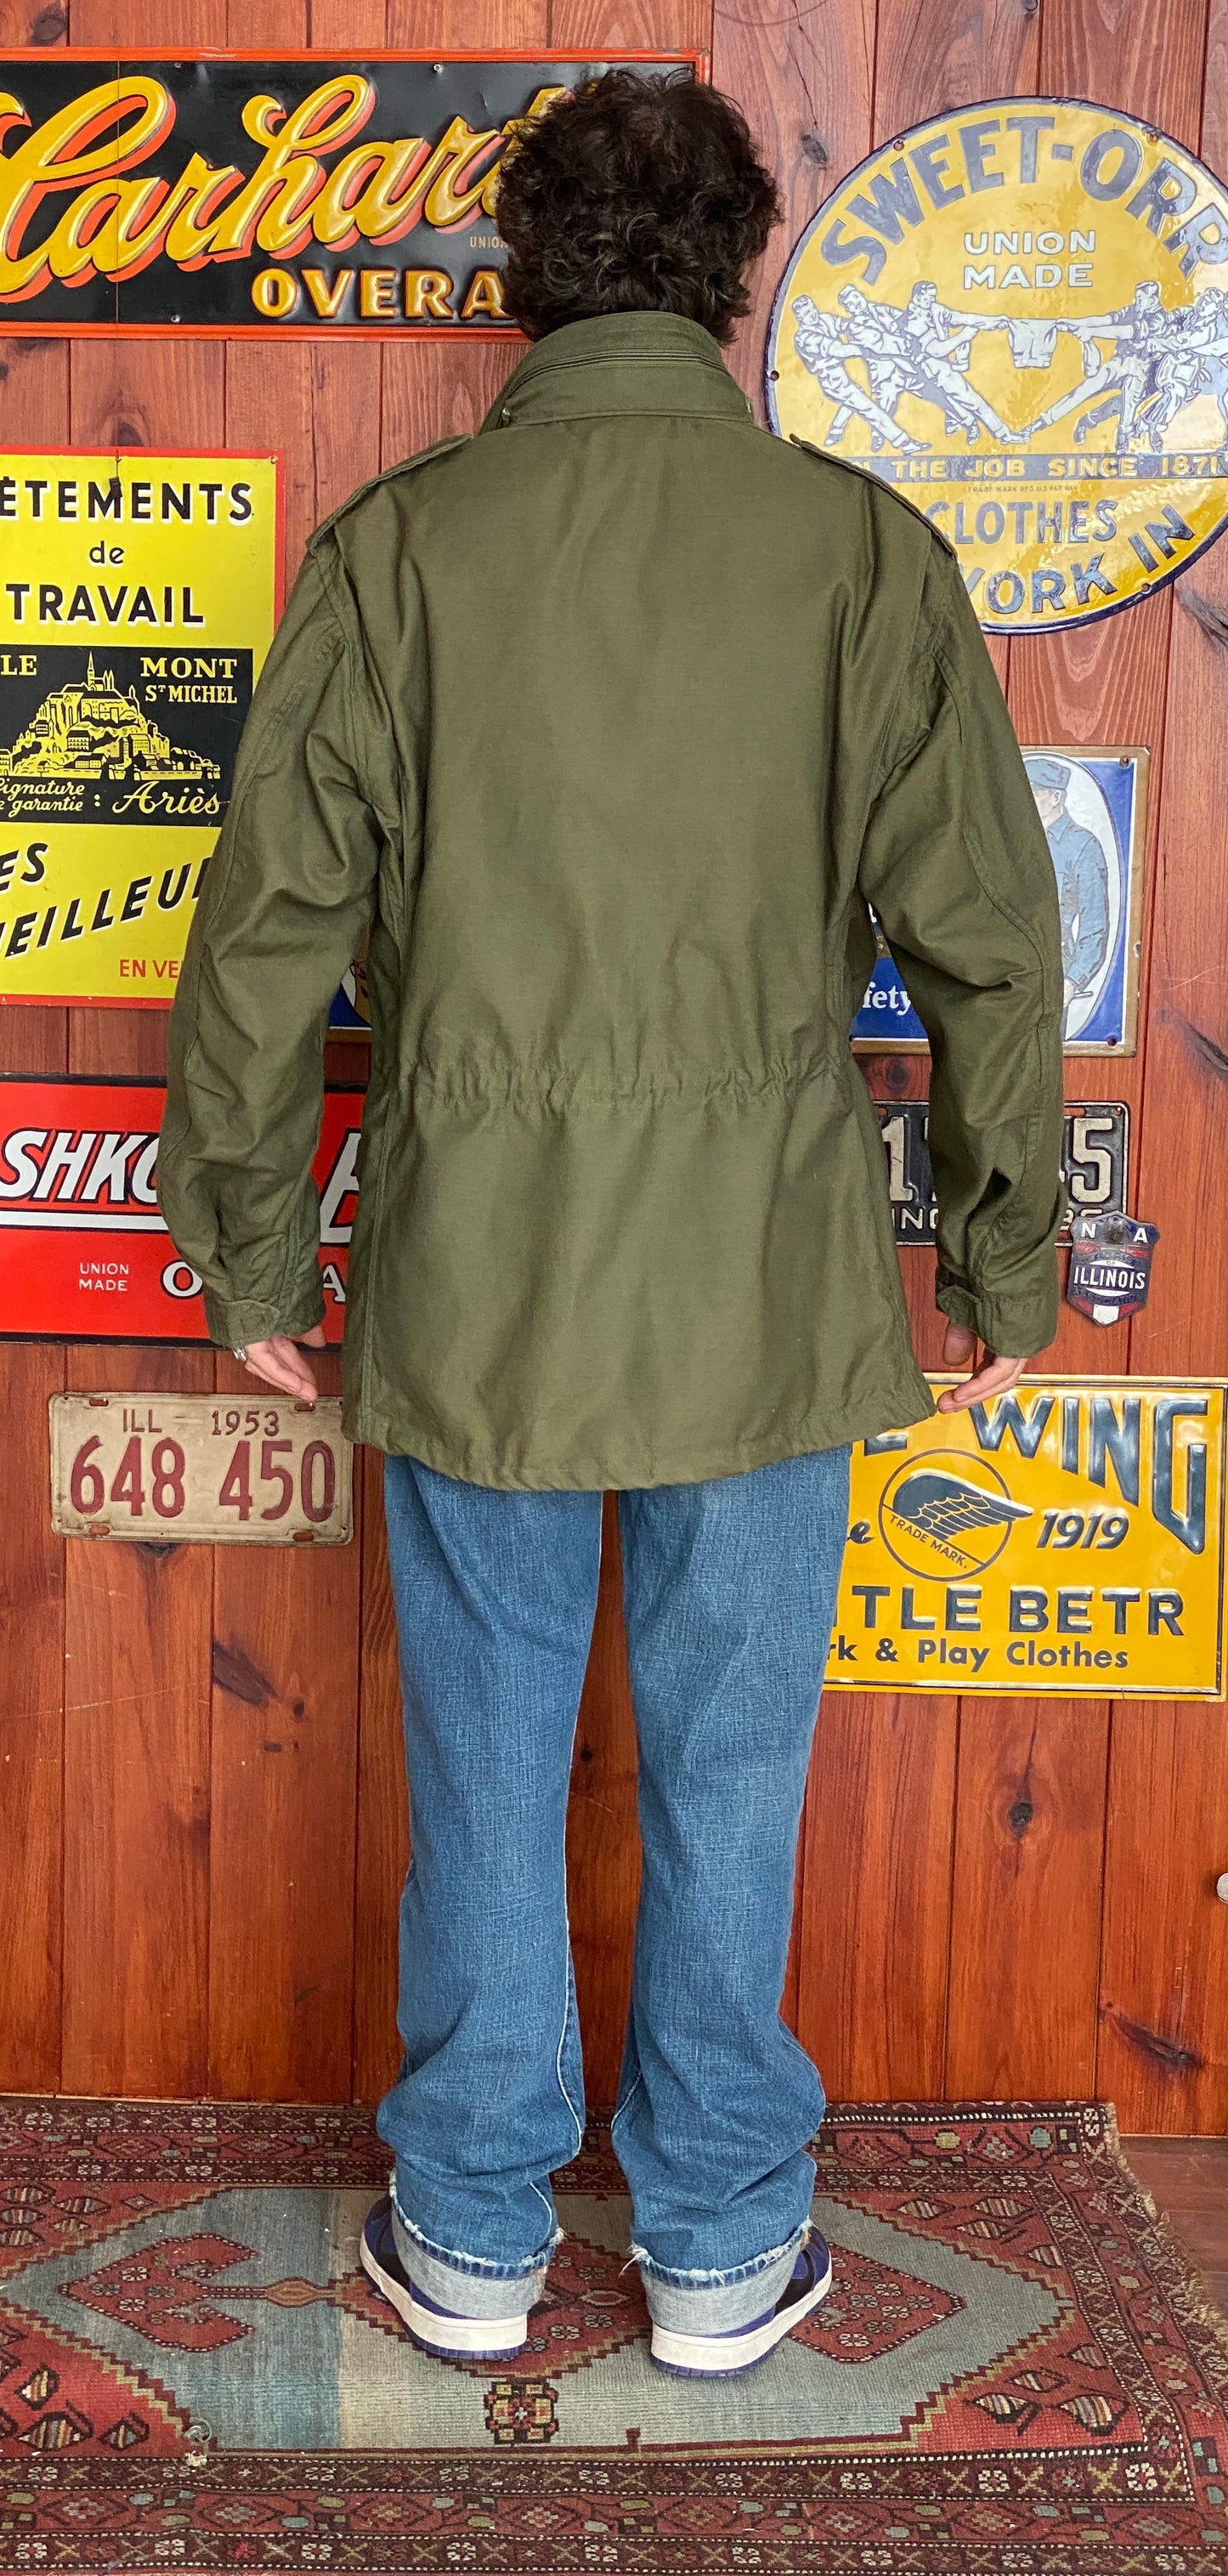 Vintage 1985 US Army M-65 Field Jacket: Authentic Military Gear with Timeless Style and History